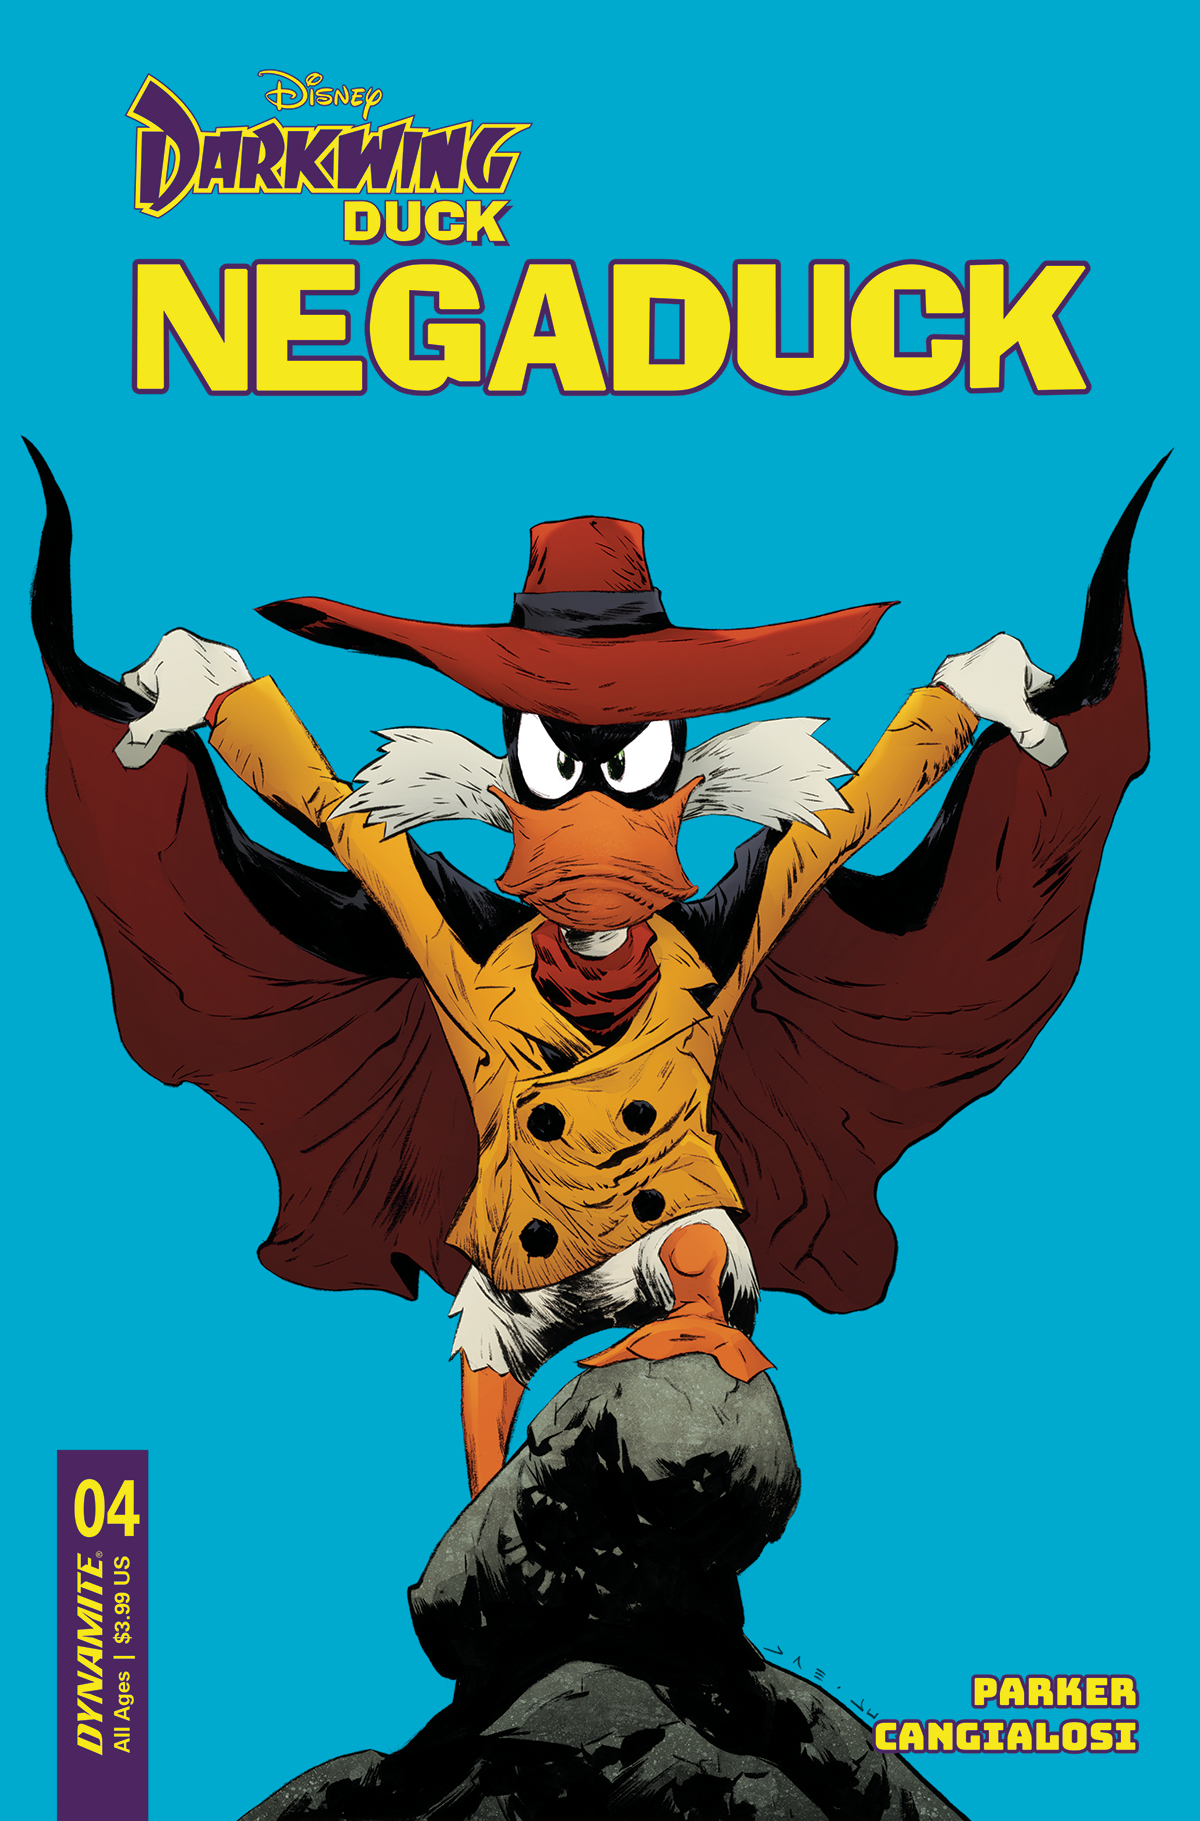 Negaduck #4 Cover A Lee